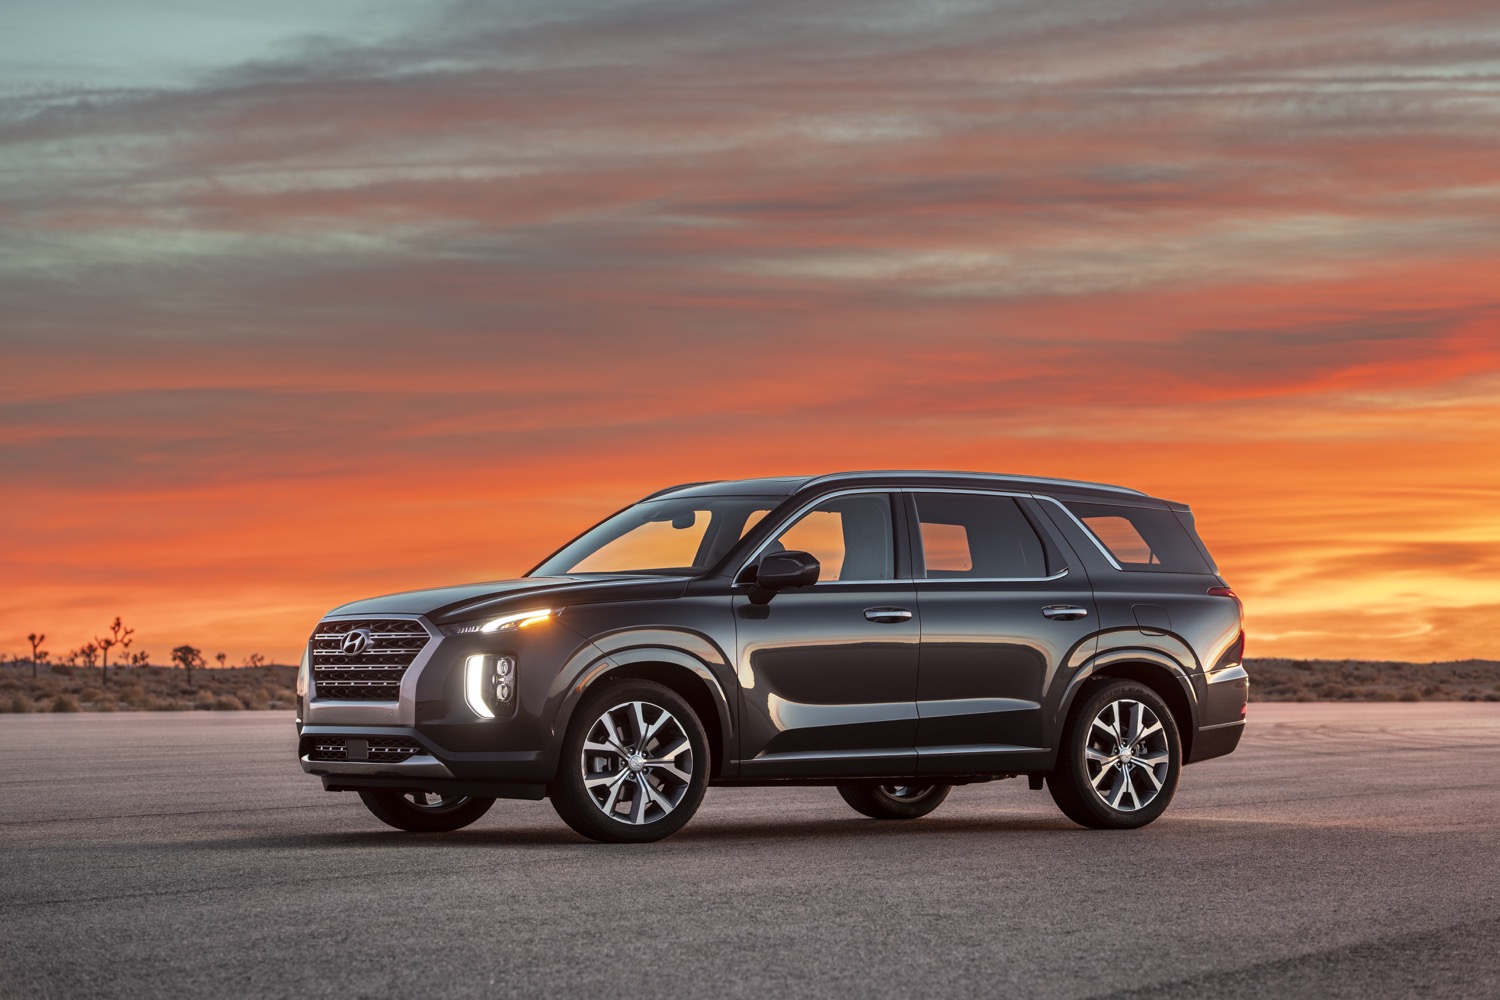 New Hyundai Palisade Takes On The Chevrolet Traverse | GM Authority